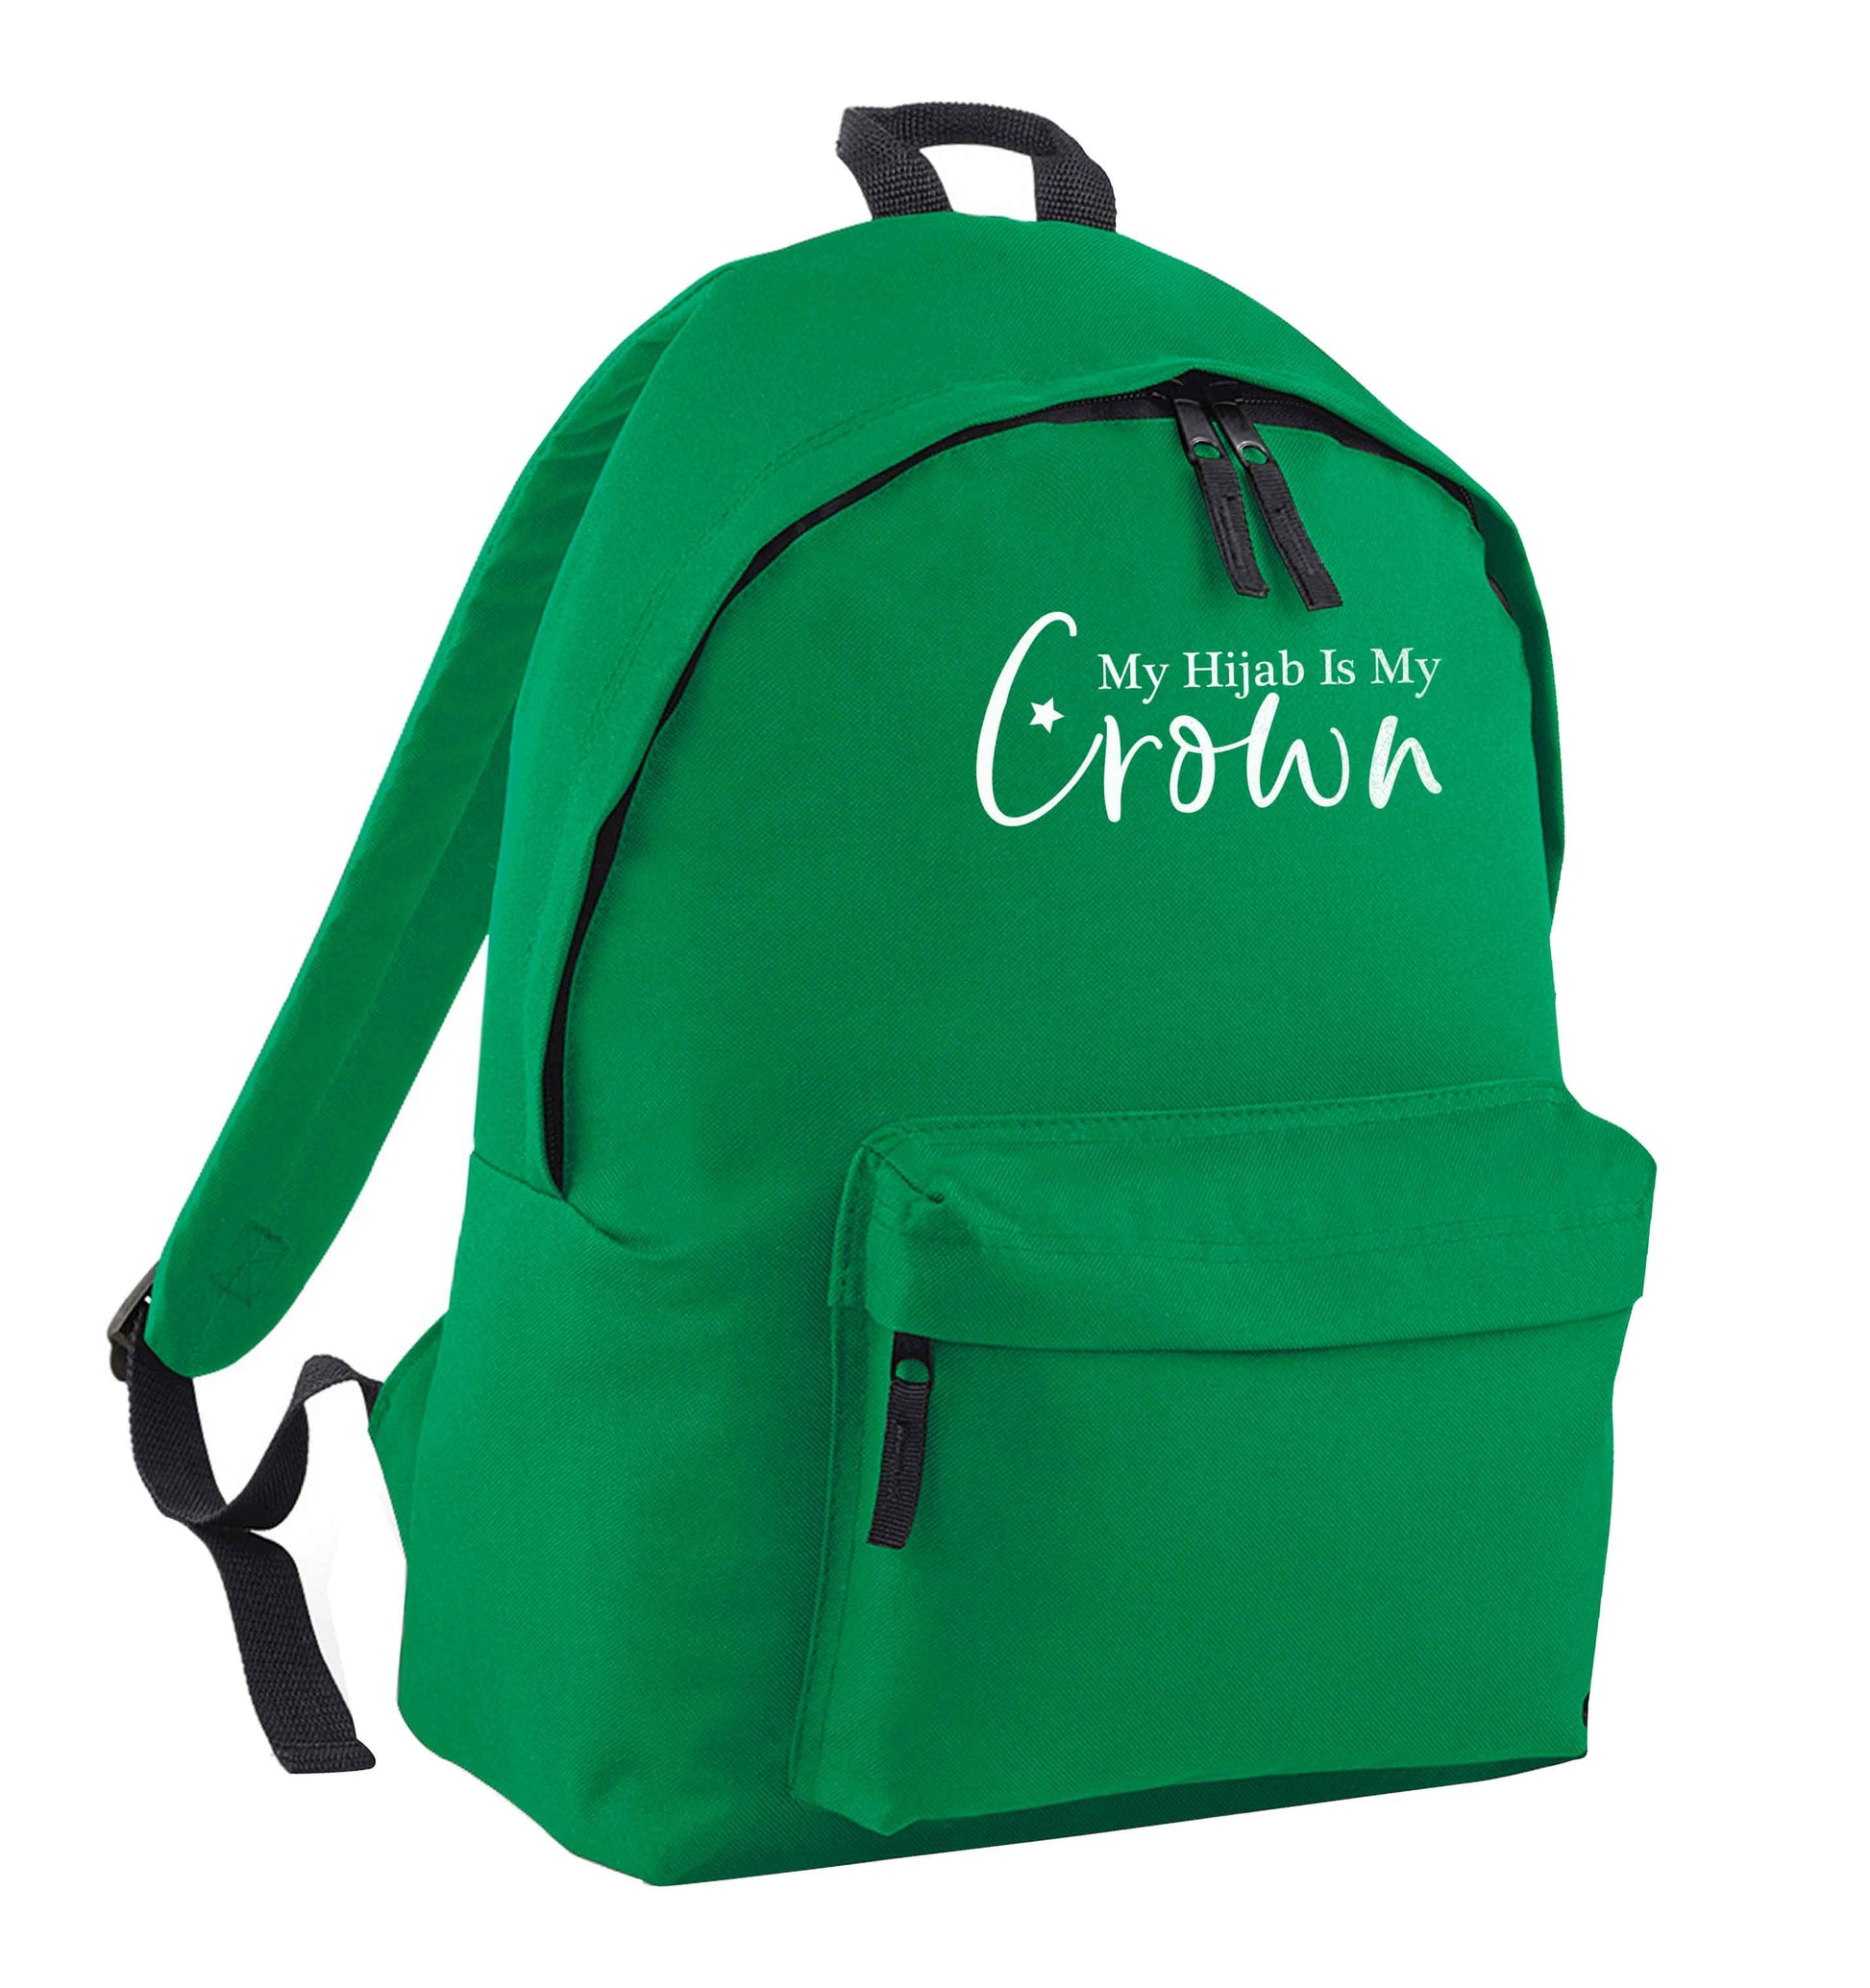 My hijab is my crown green adults backpack